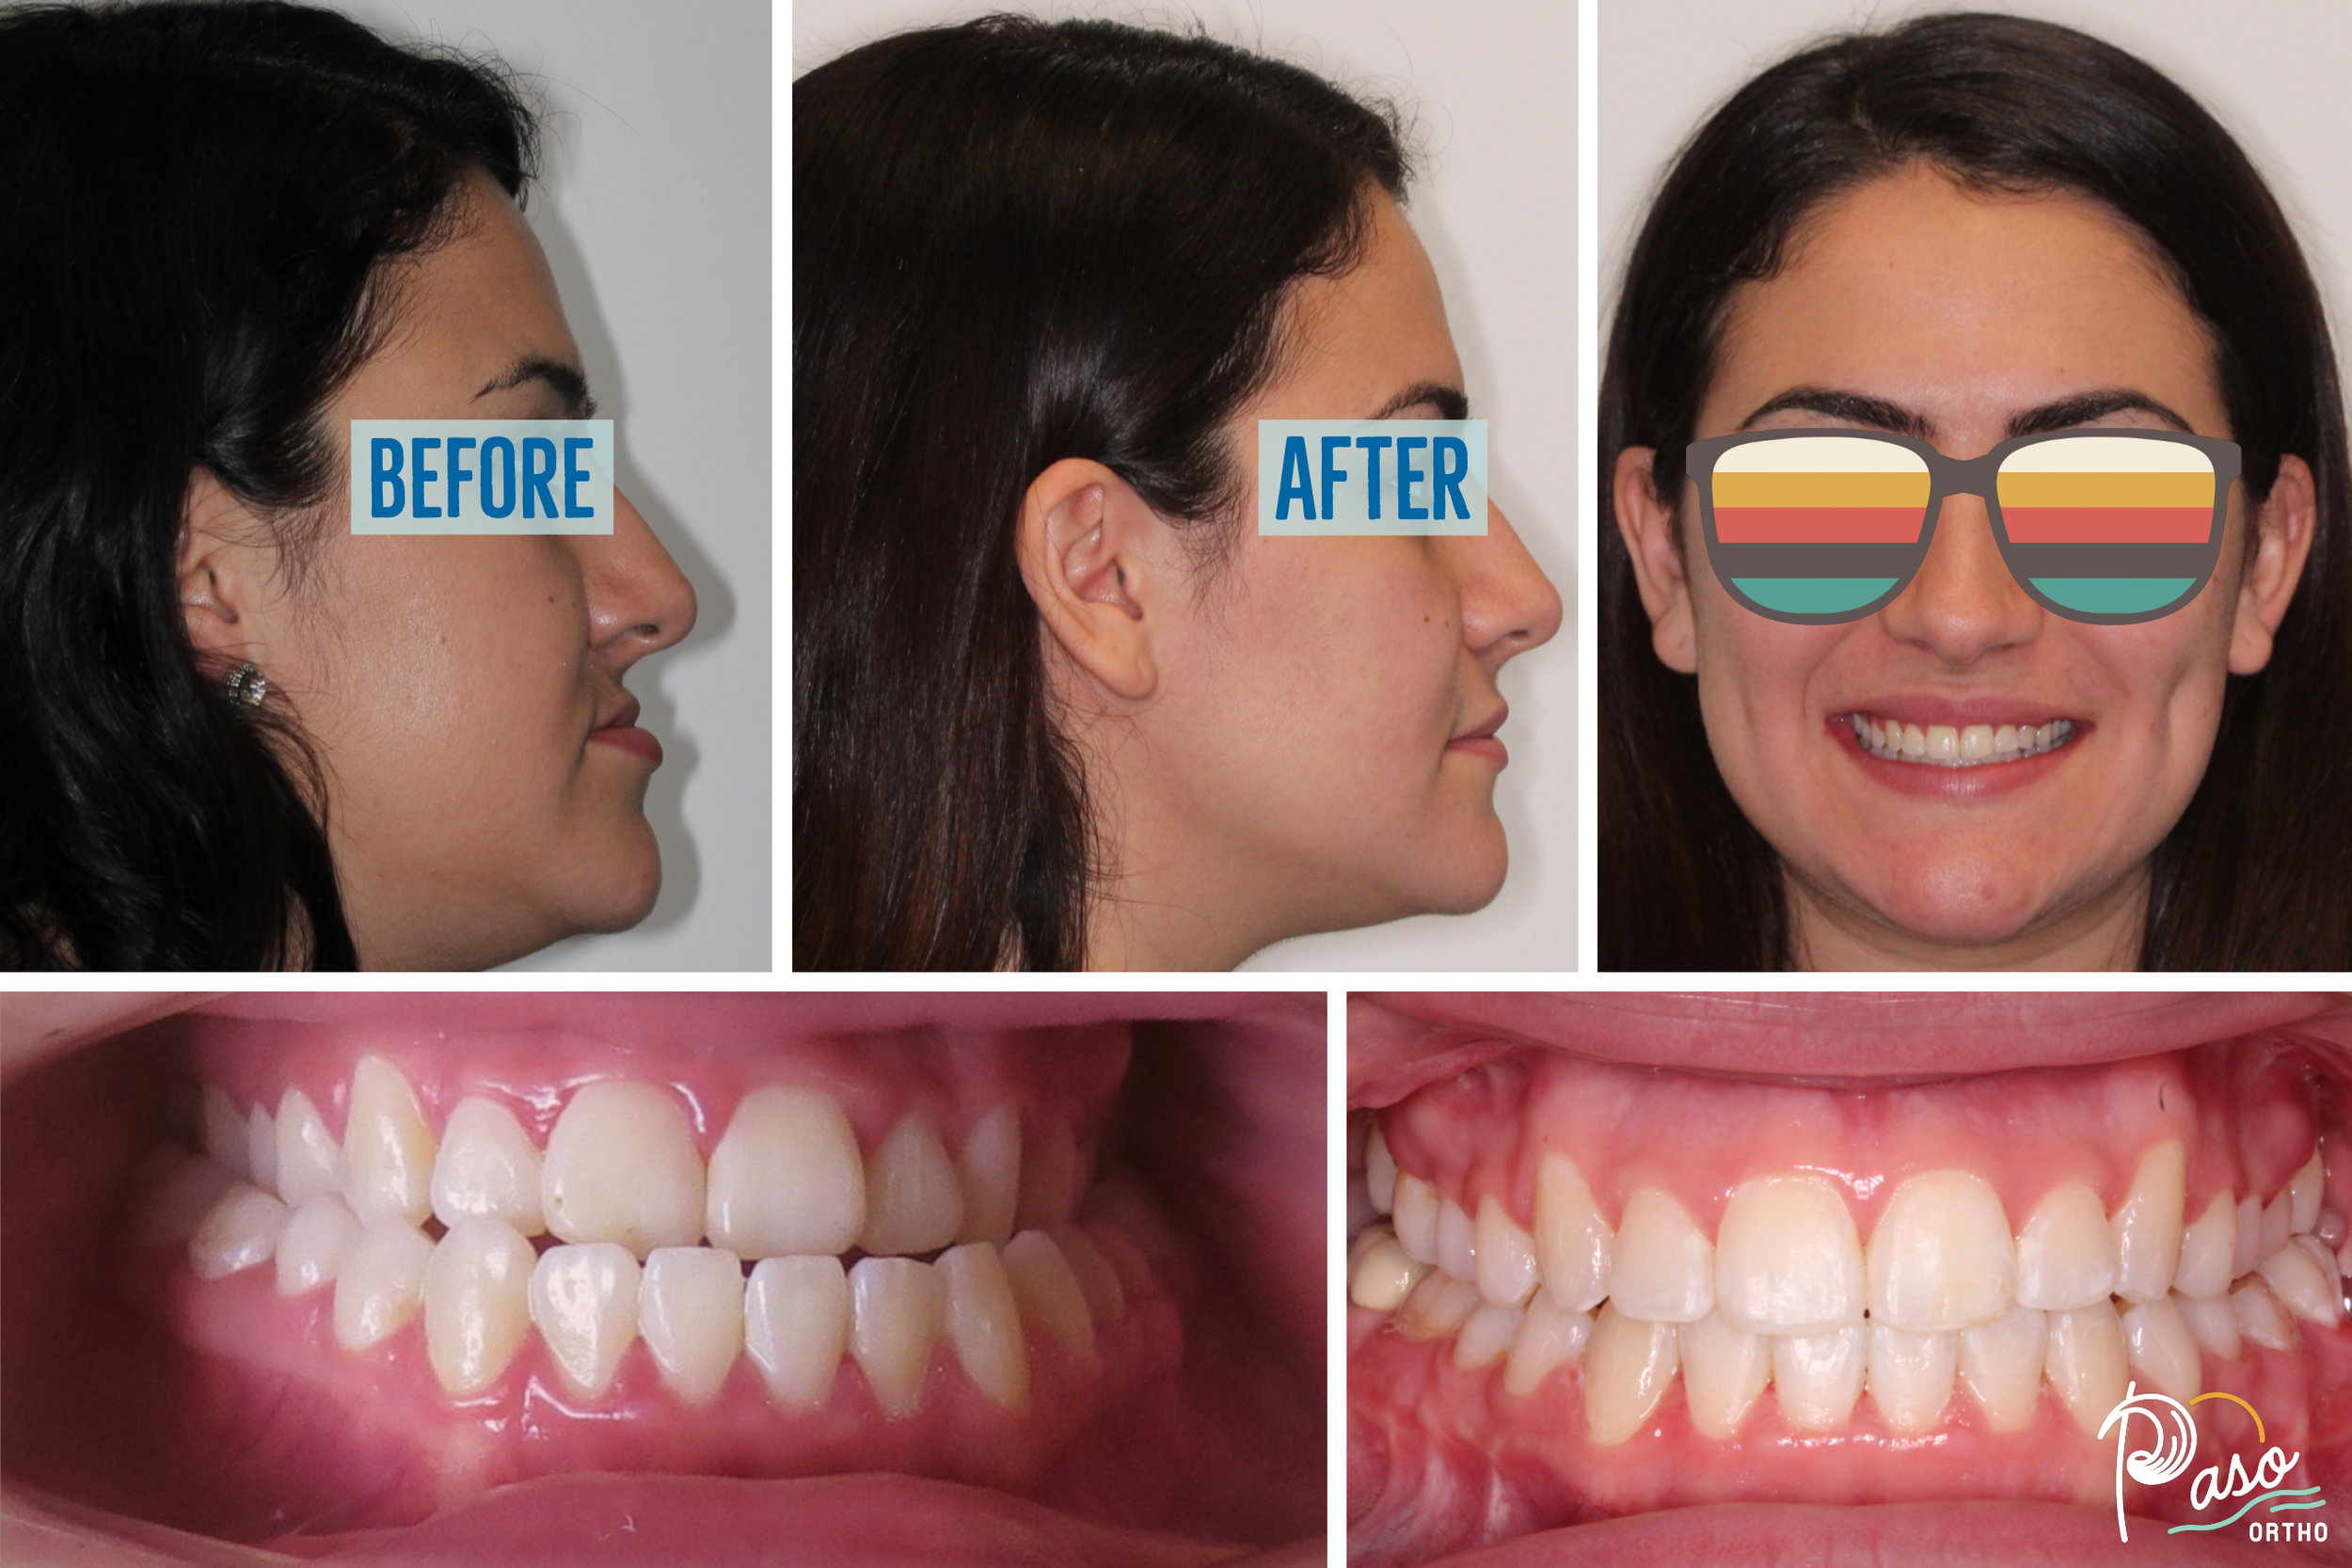 Adult Braces and Jaw Surgery